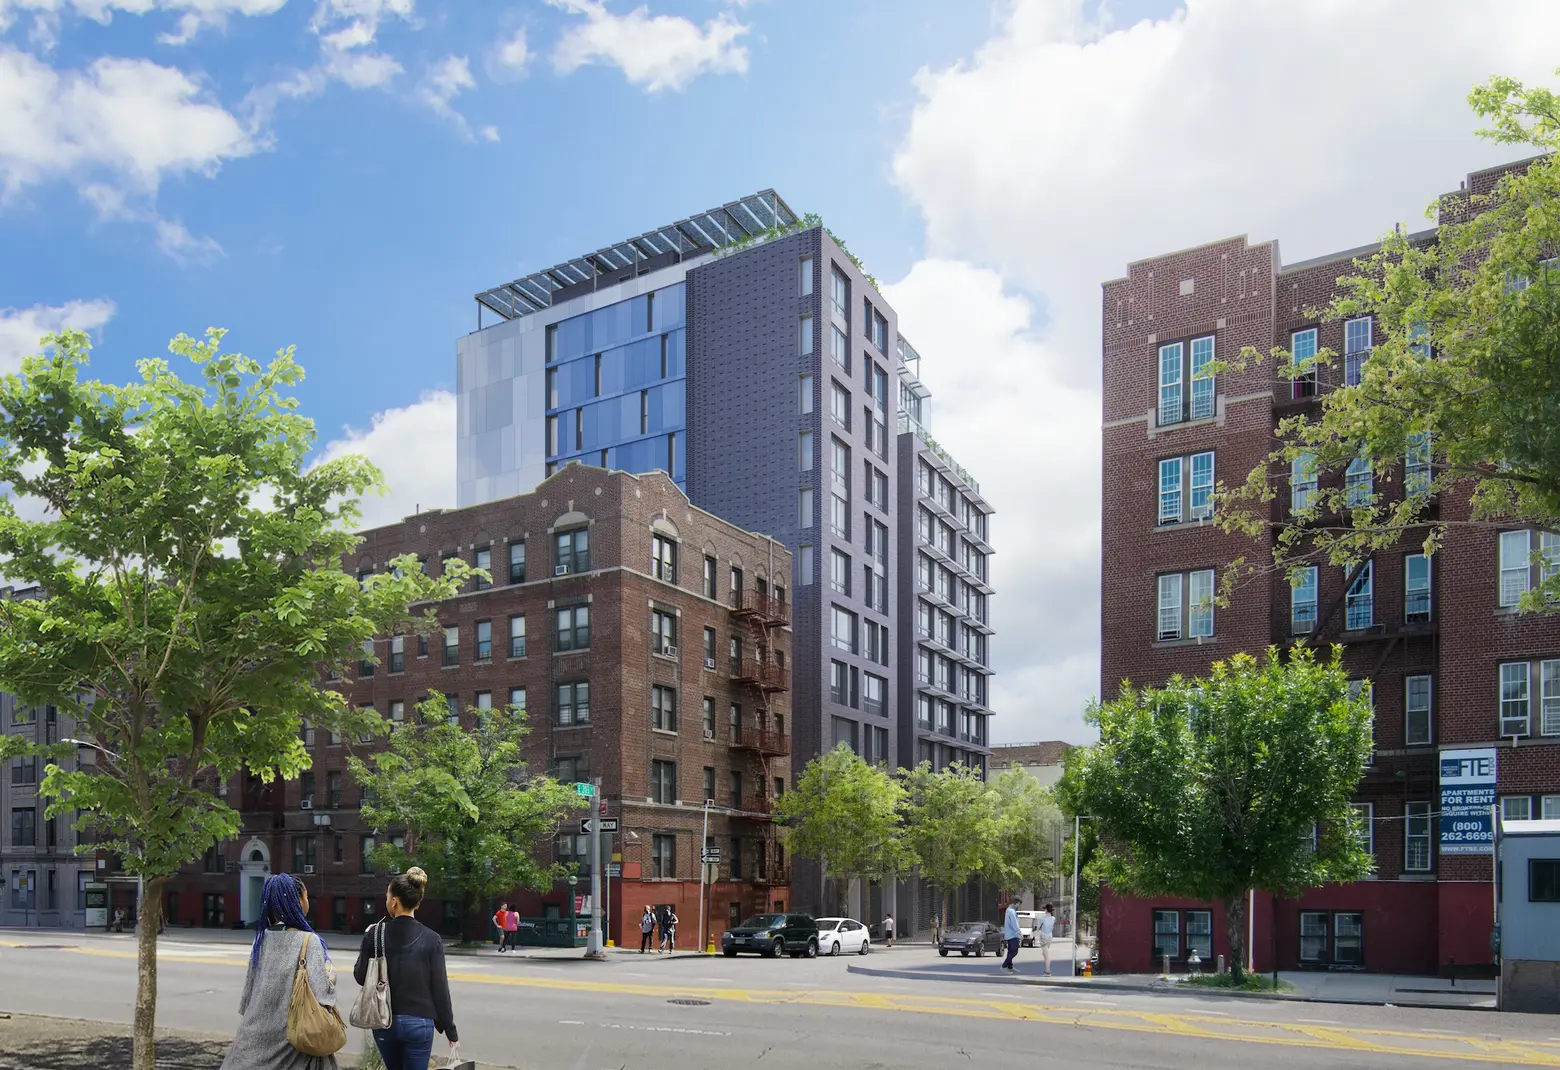 Apply for 41 affordable apartments in the Bronx’s Jerome Park, from $592/month